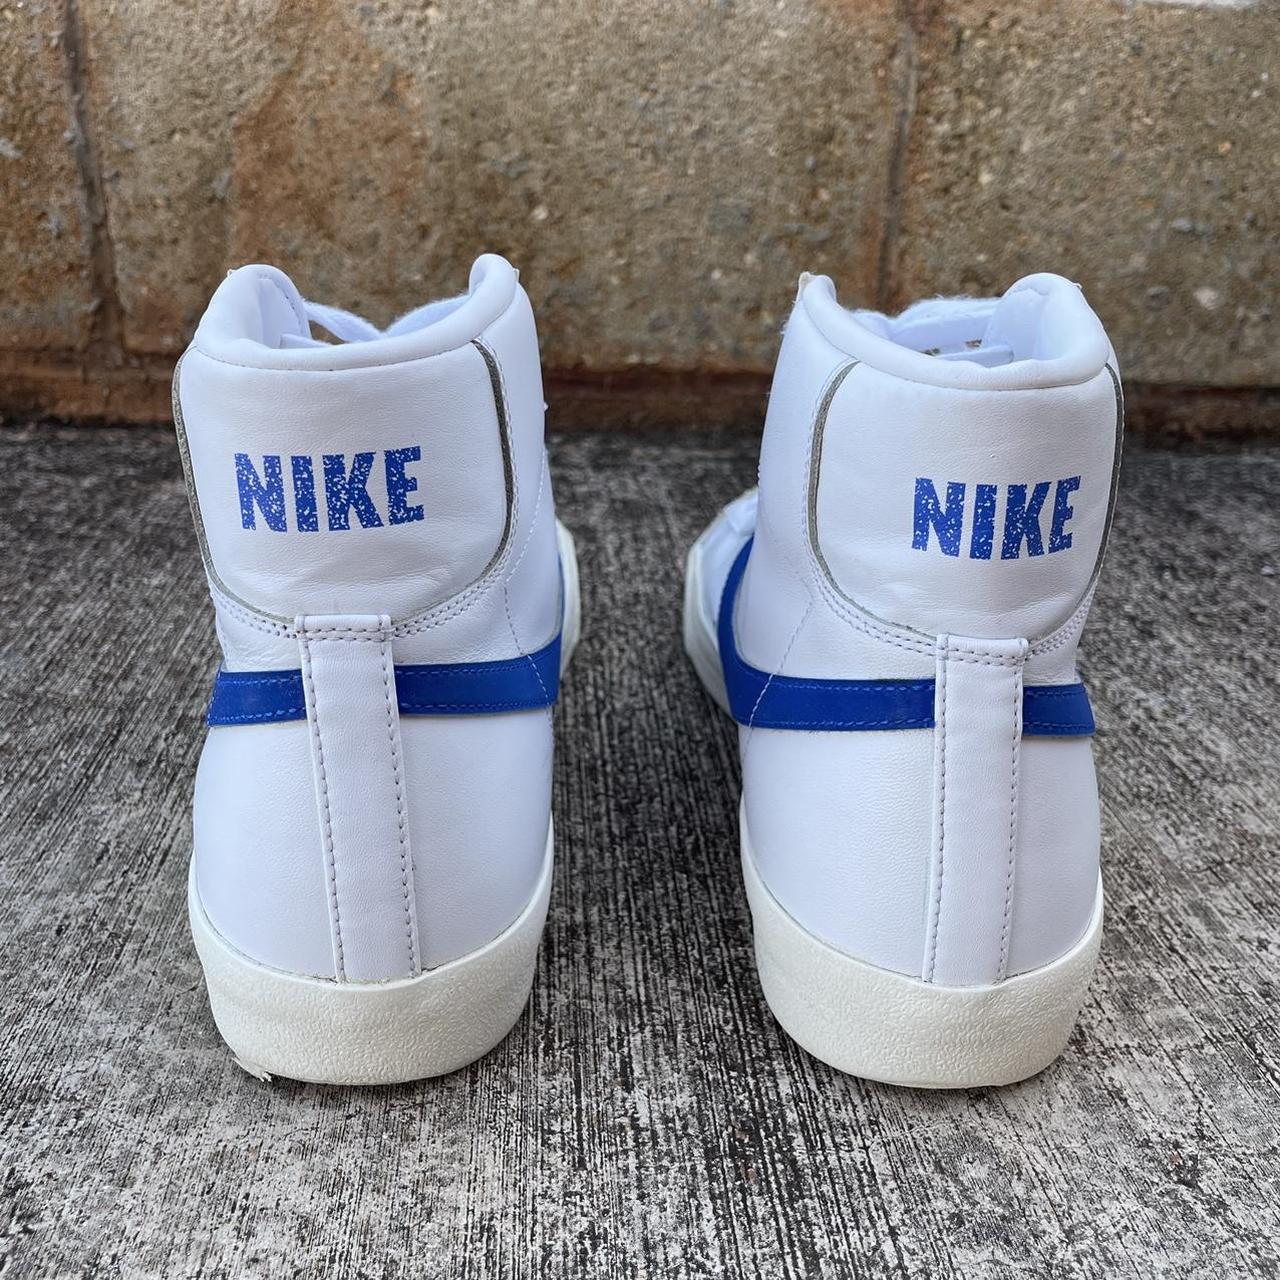 Nike Men's White and Blue Trainers (2)